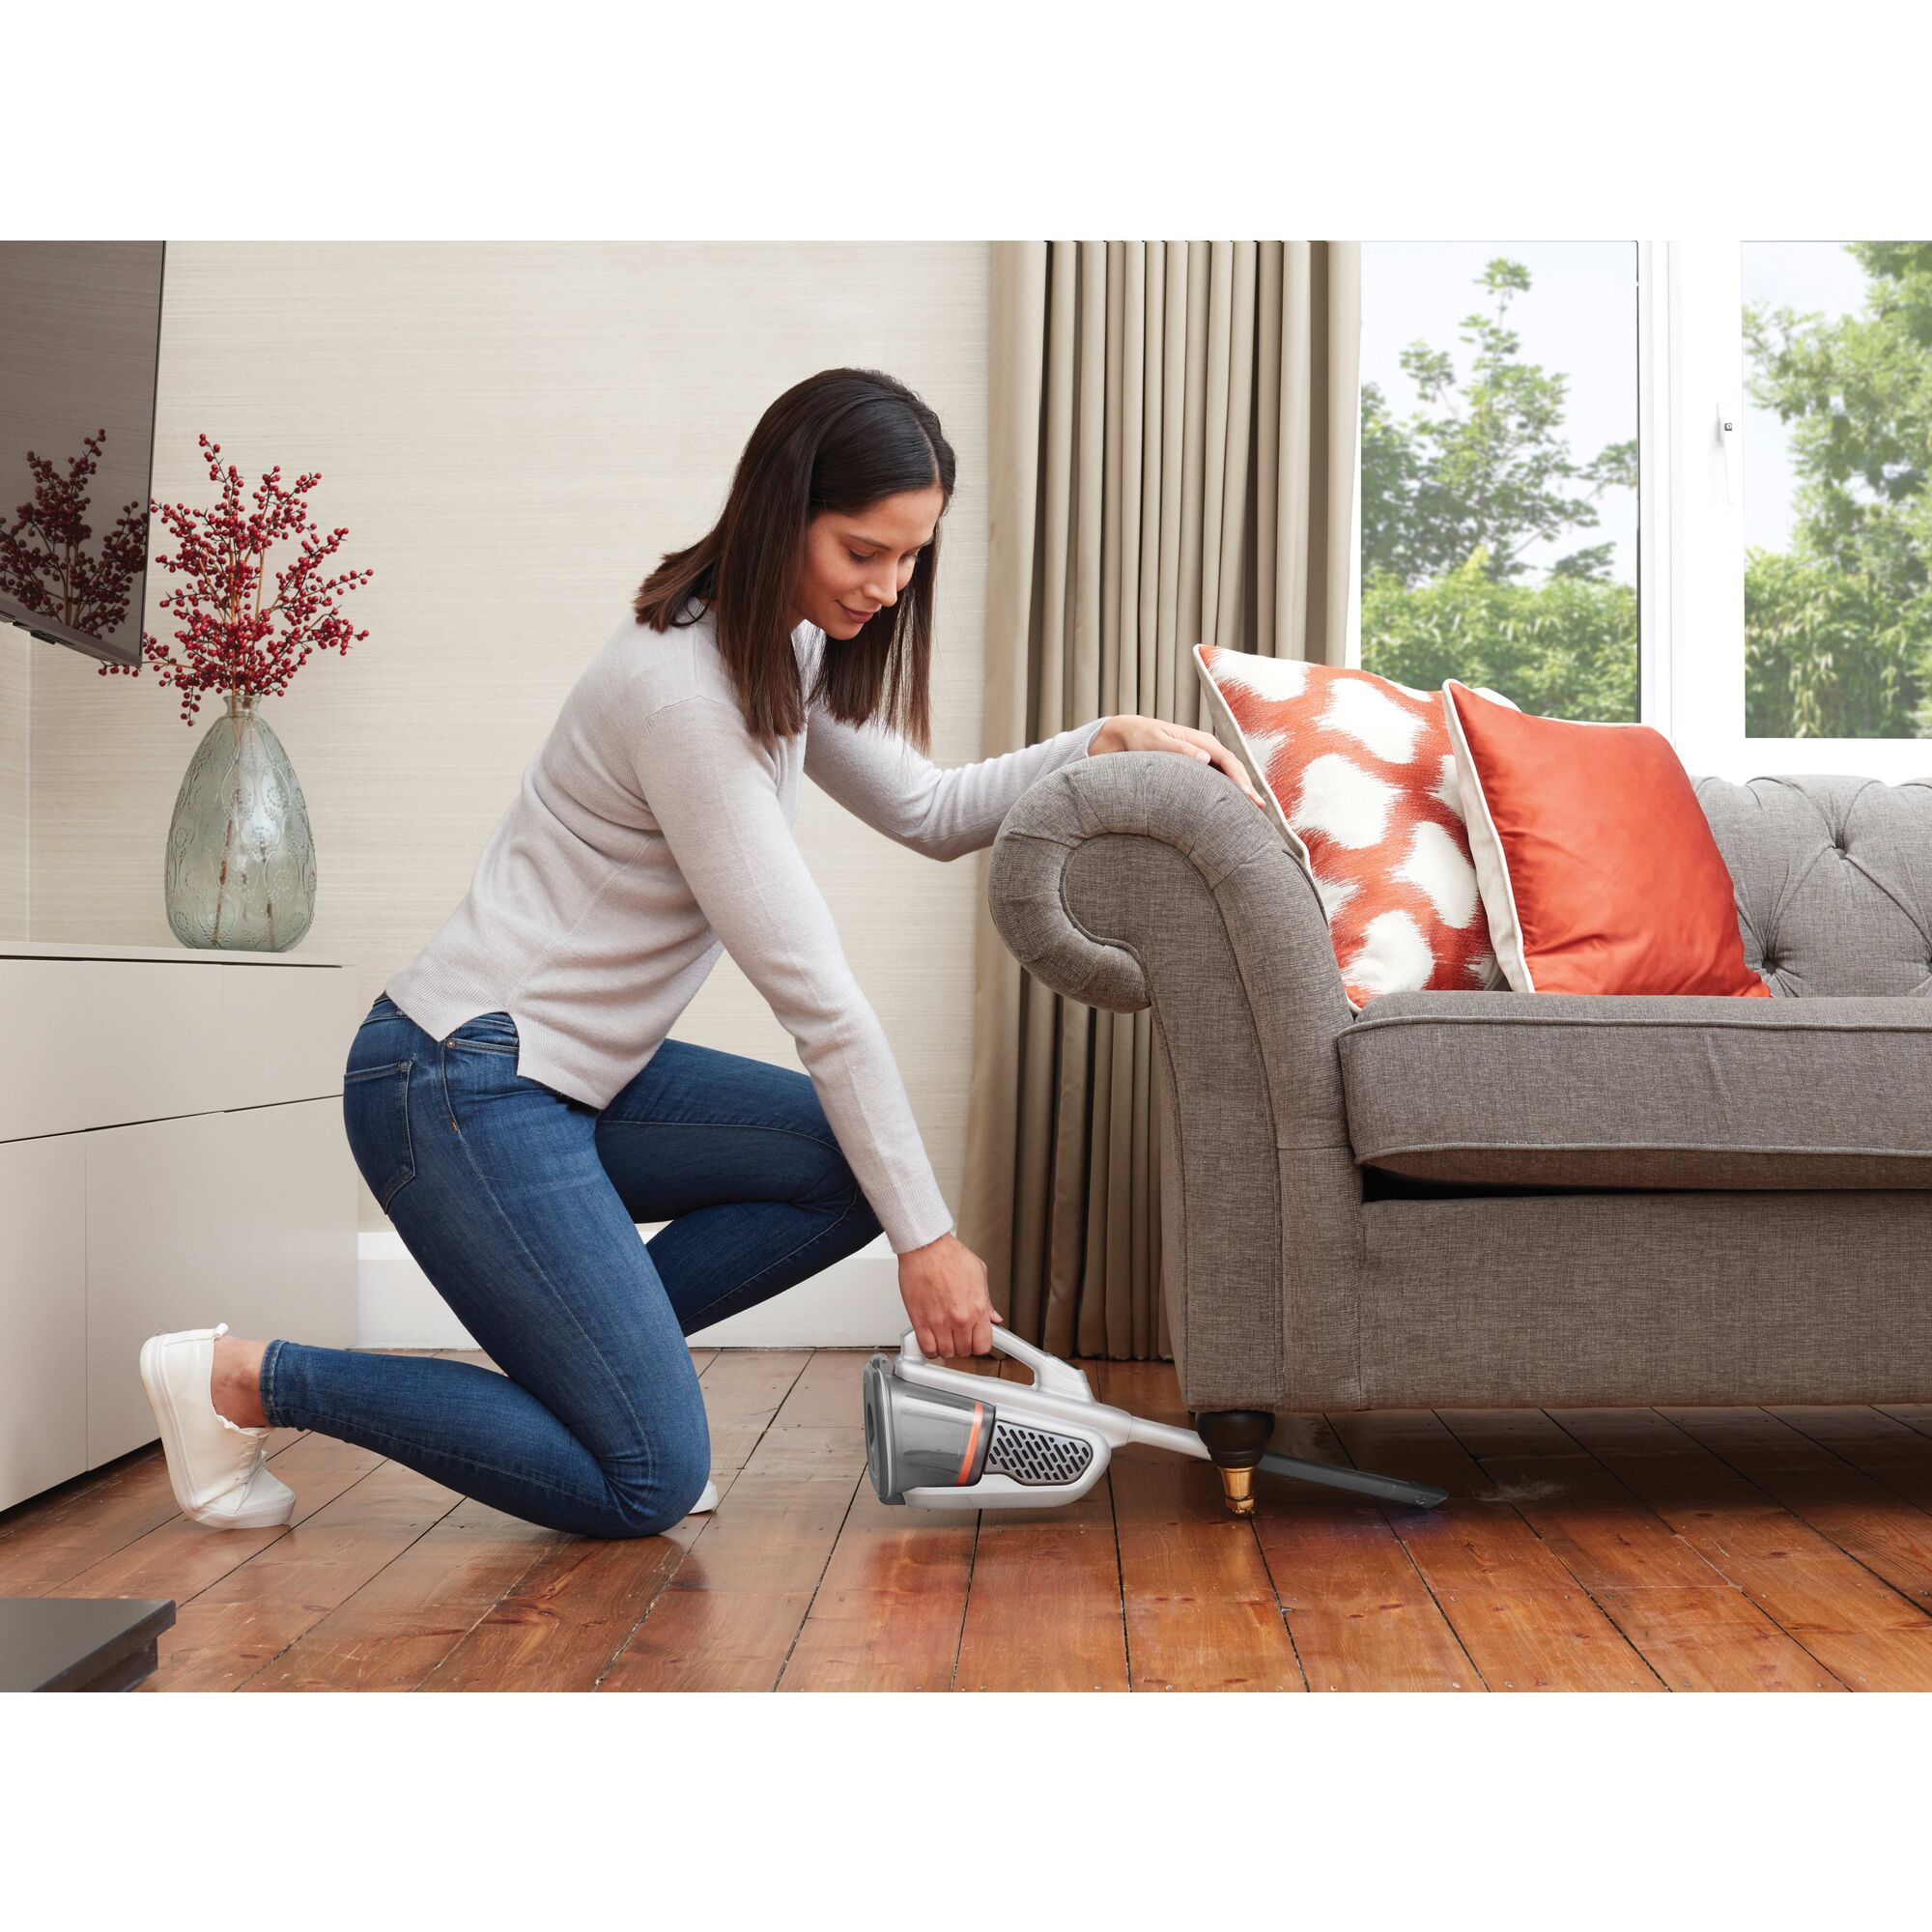 12 Volt dust buster Advanced Clean plus Cordless Hand Vacuum being used by a person under a sofa.